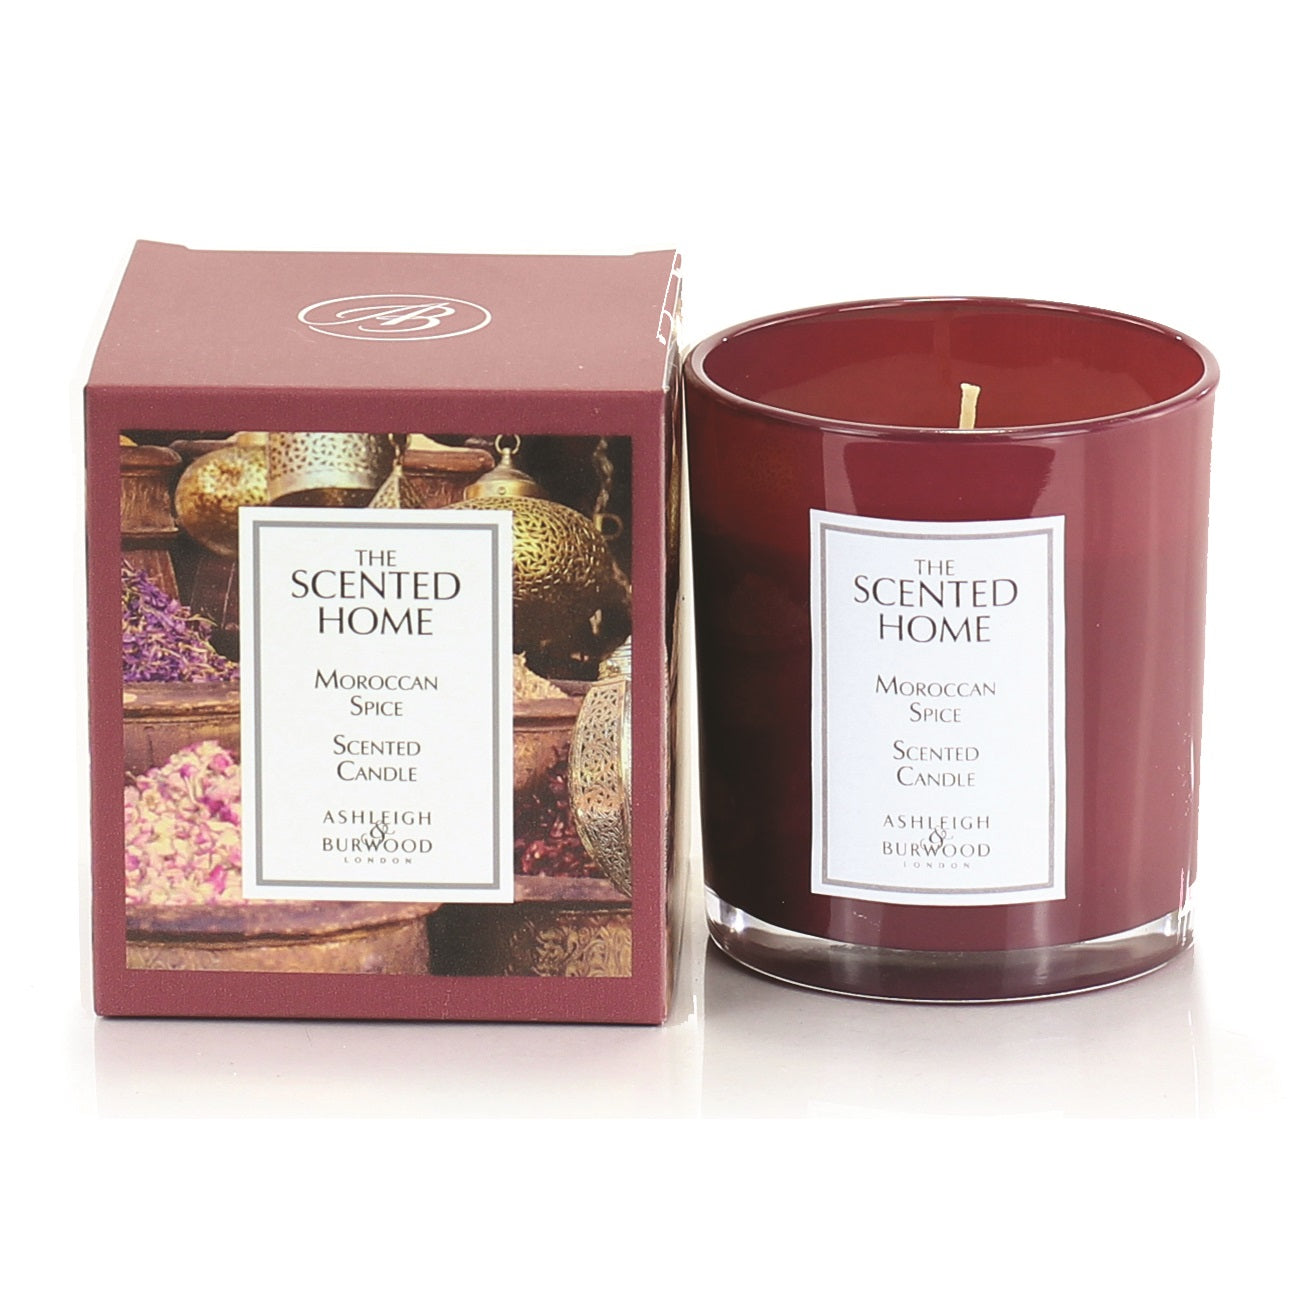 BOXED GLASS CANDLE 225G MOROCCAN SPICE - SCENTED HOME